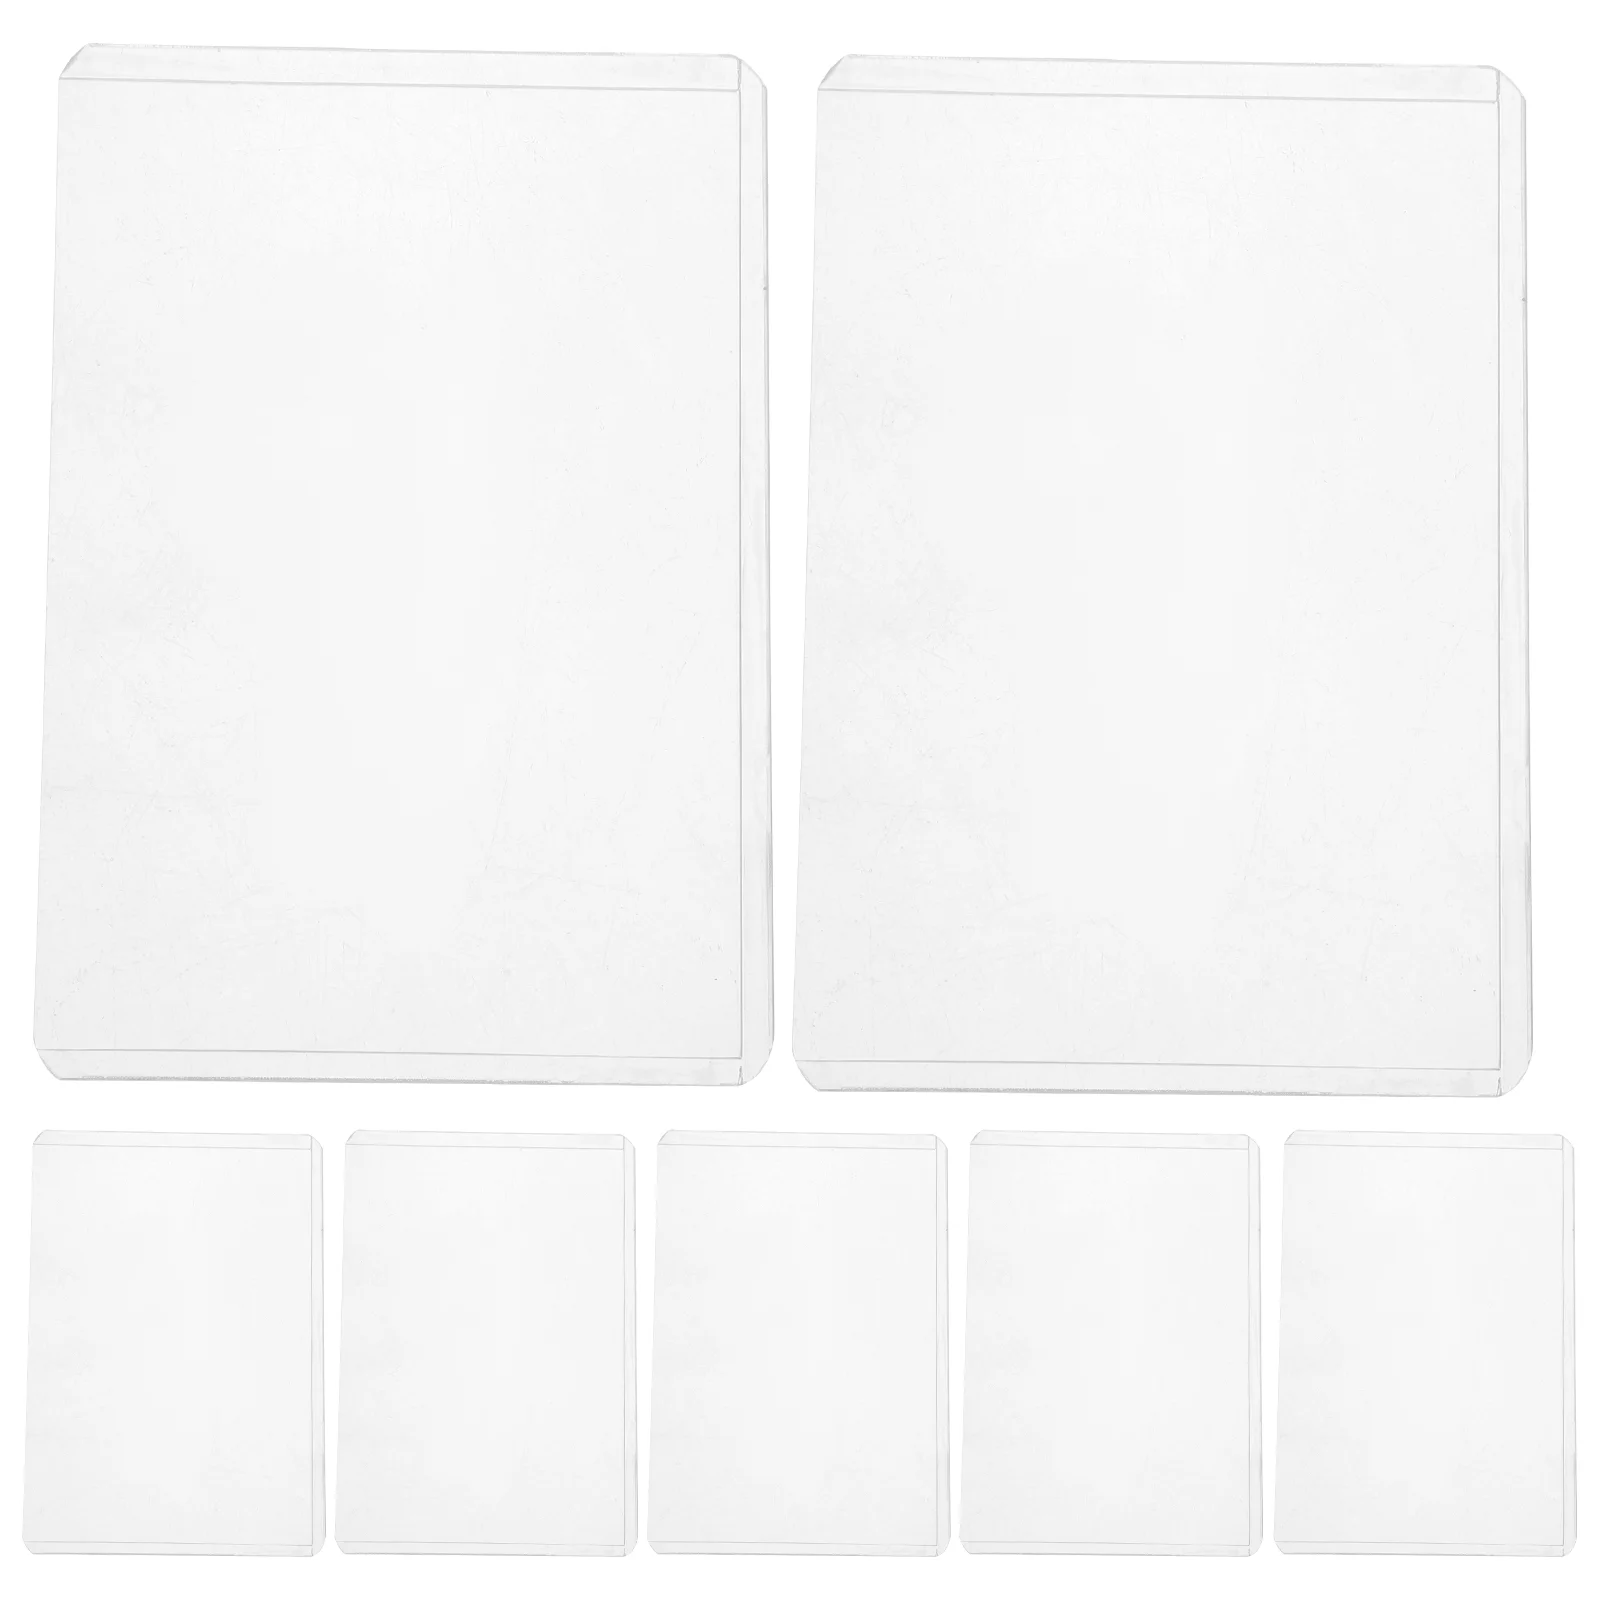 

20Pcs Cards Display Covers Cards Protective Covers Protect Album Cards Protective Sleeves